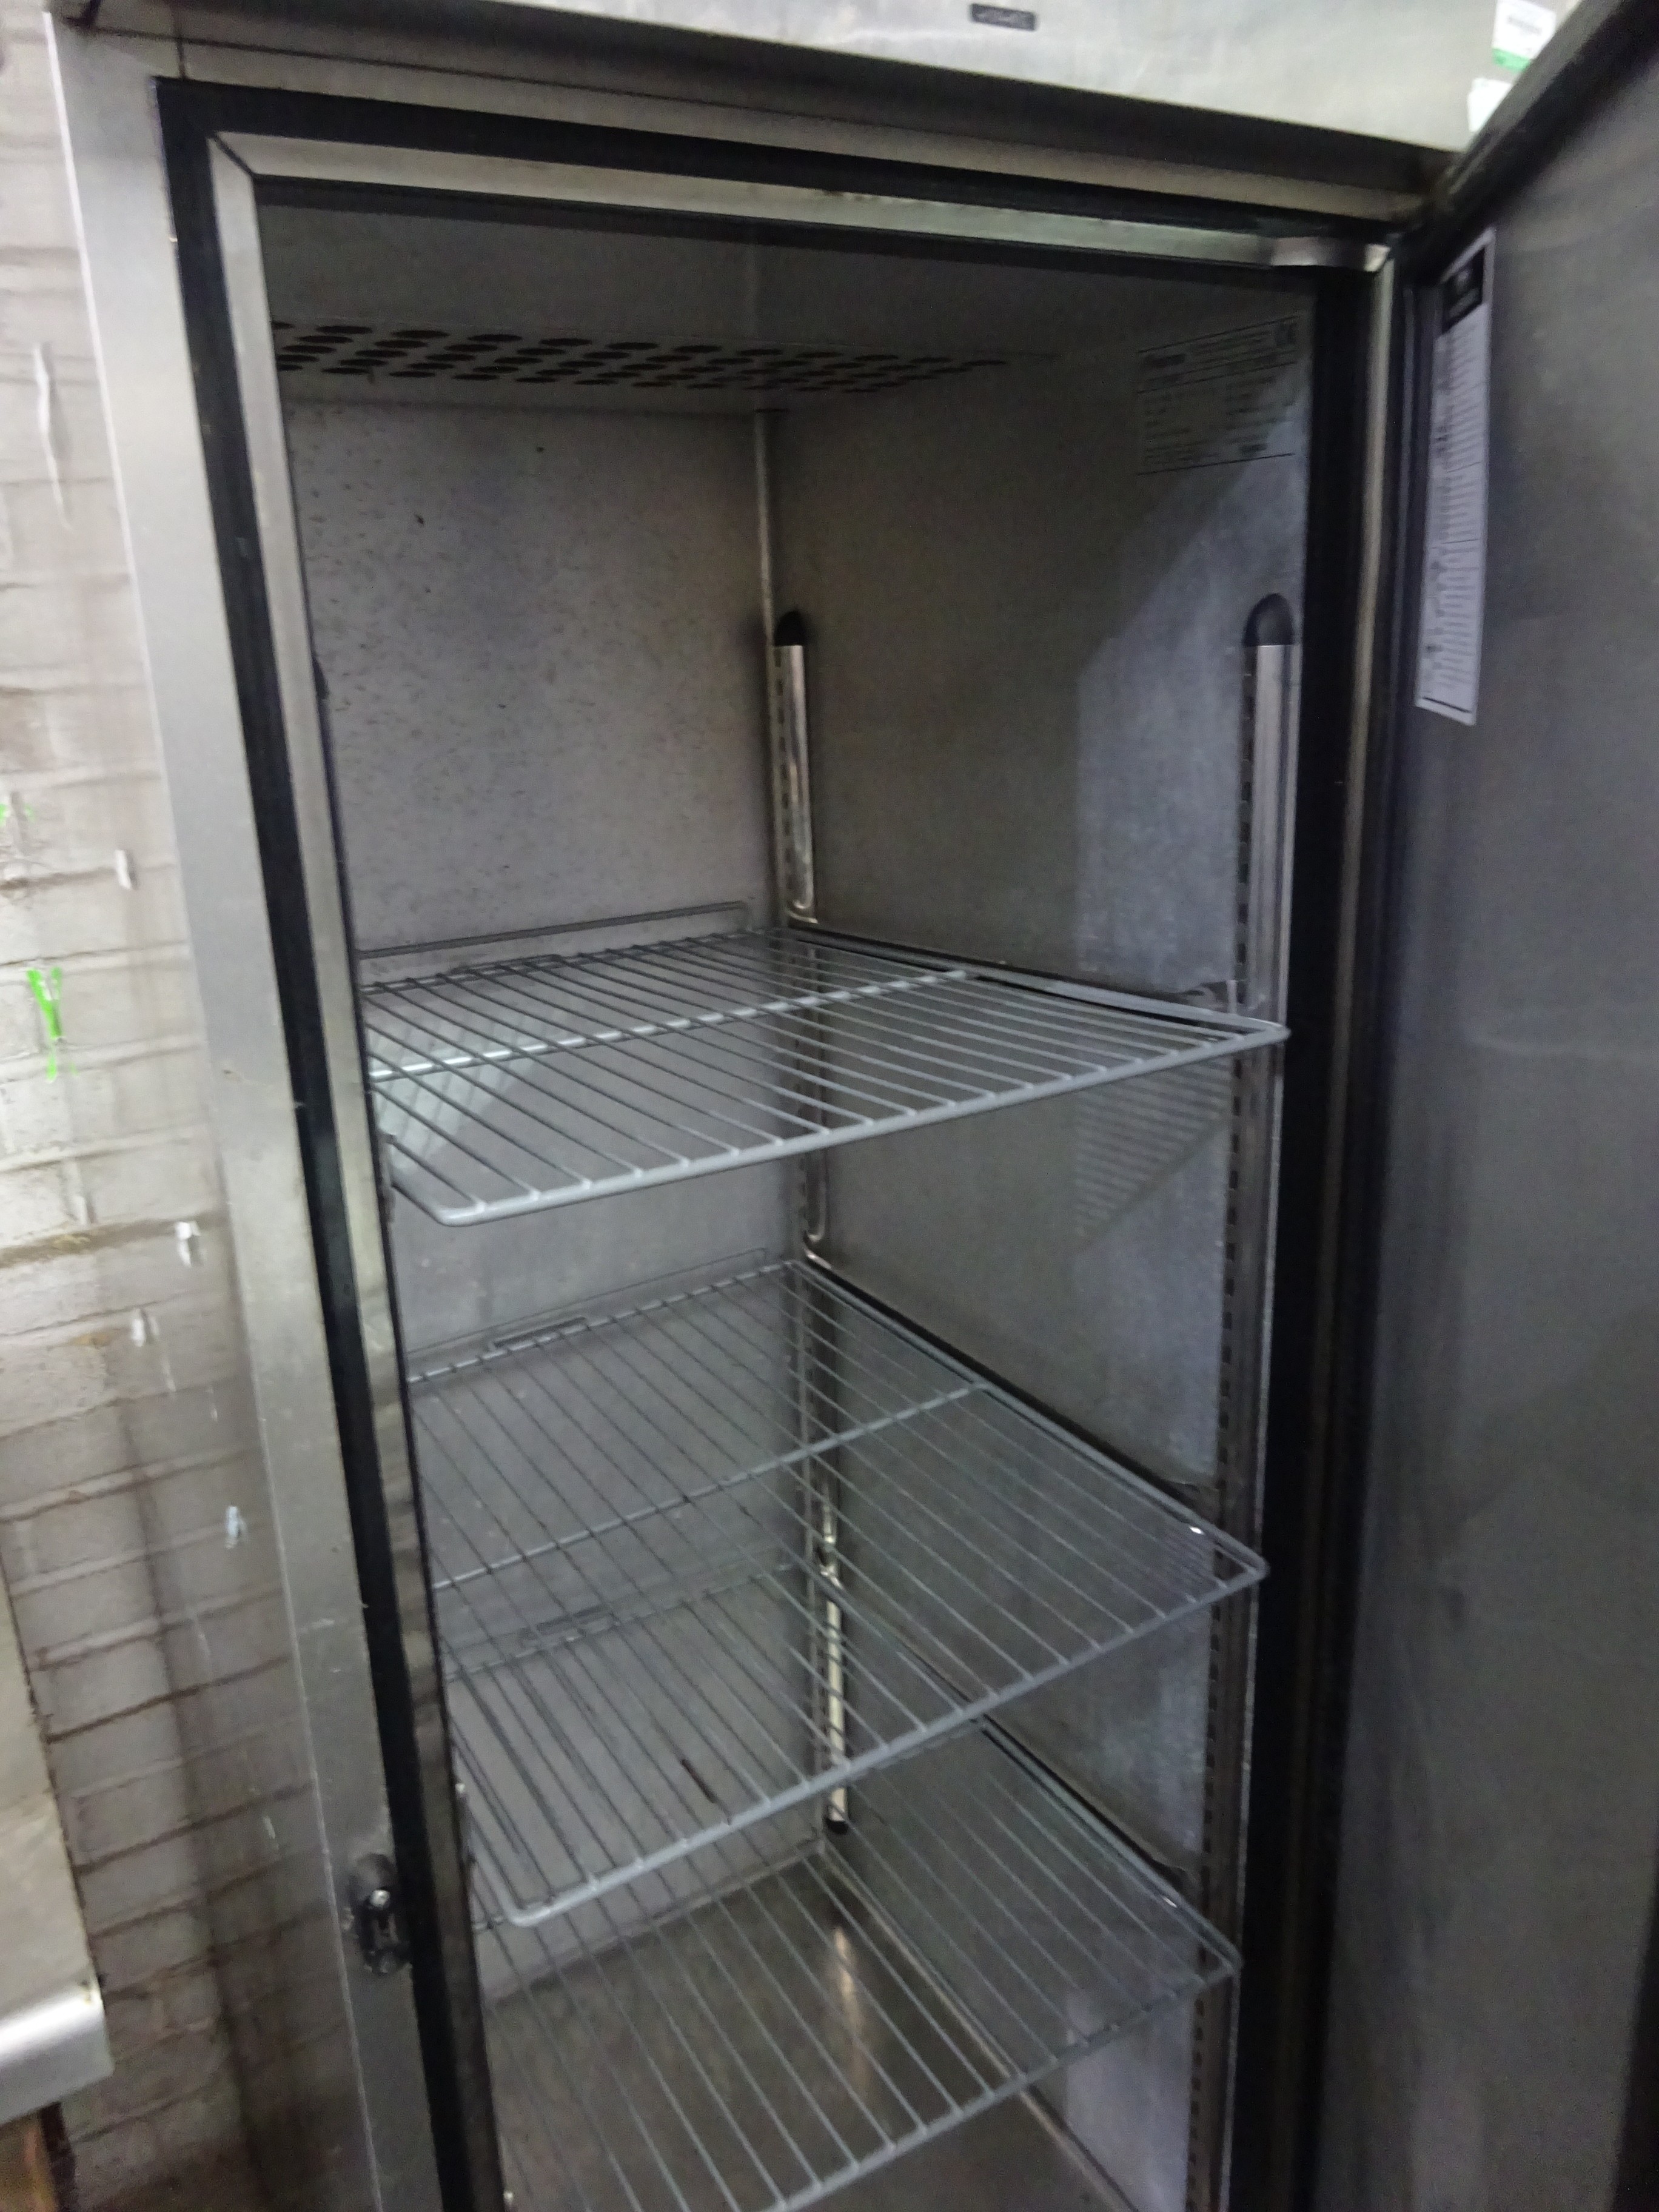 Fosters stainless steel single door upright fridge W: 70cms, D: 80cms, H: 209cms - Image 3 of 3